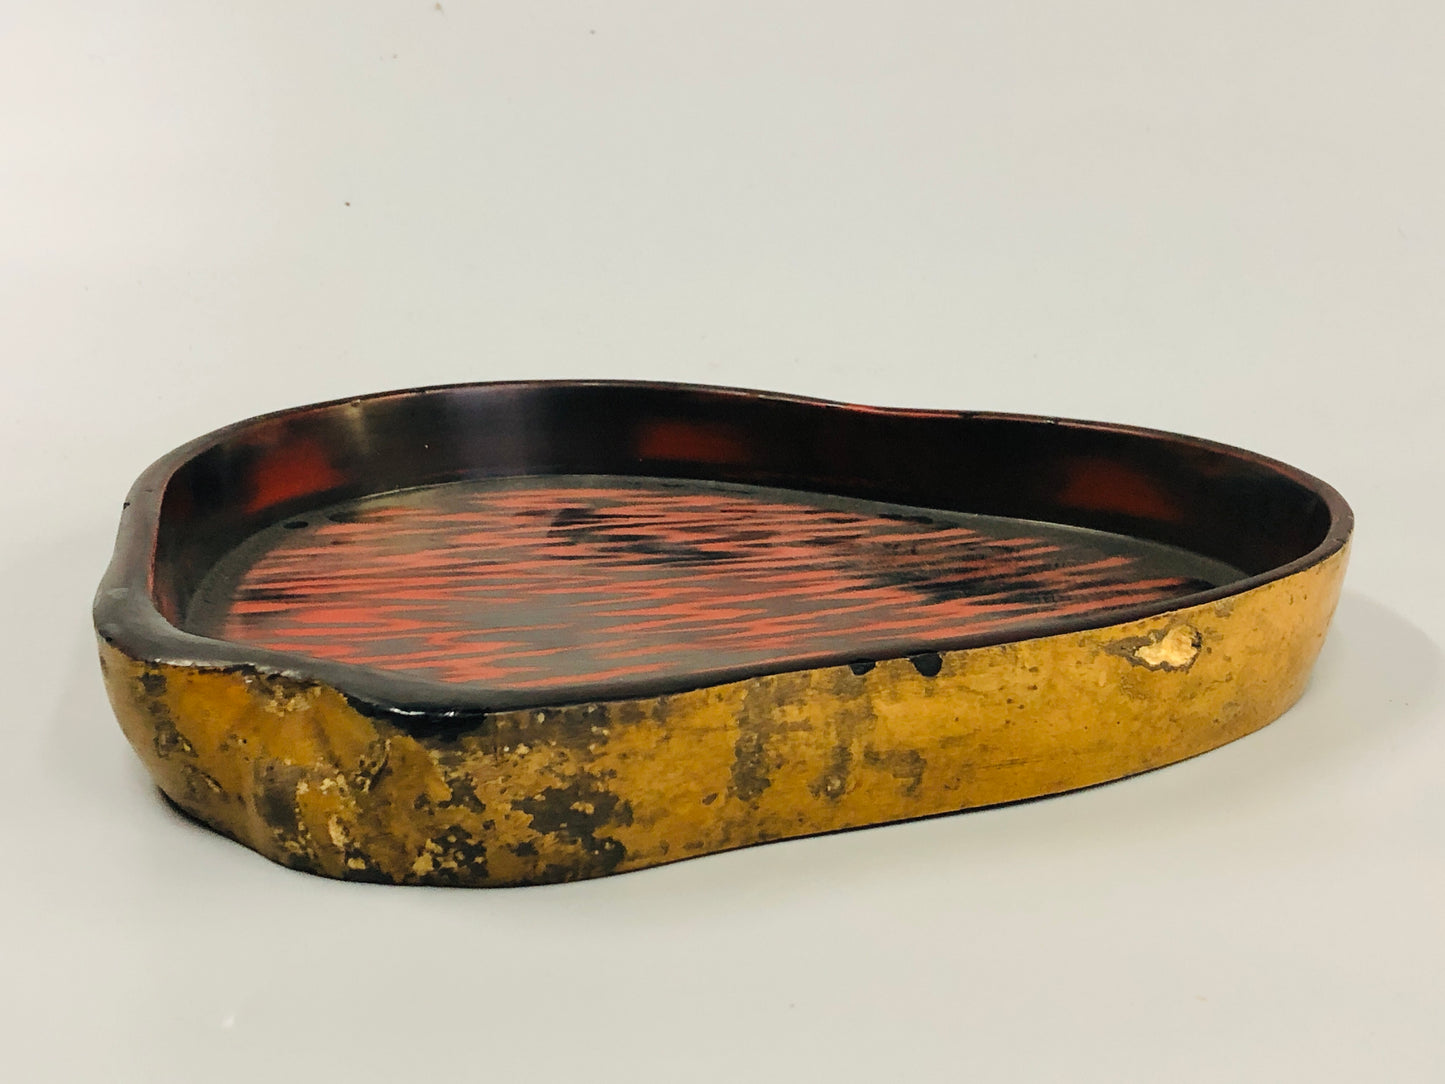 Y5261 TRAY Negoro lacquer Obon gourd craft Japan antique vintage tableware